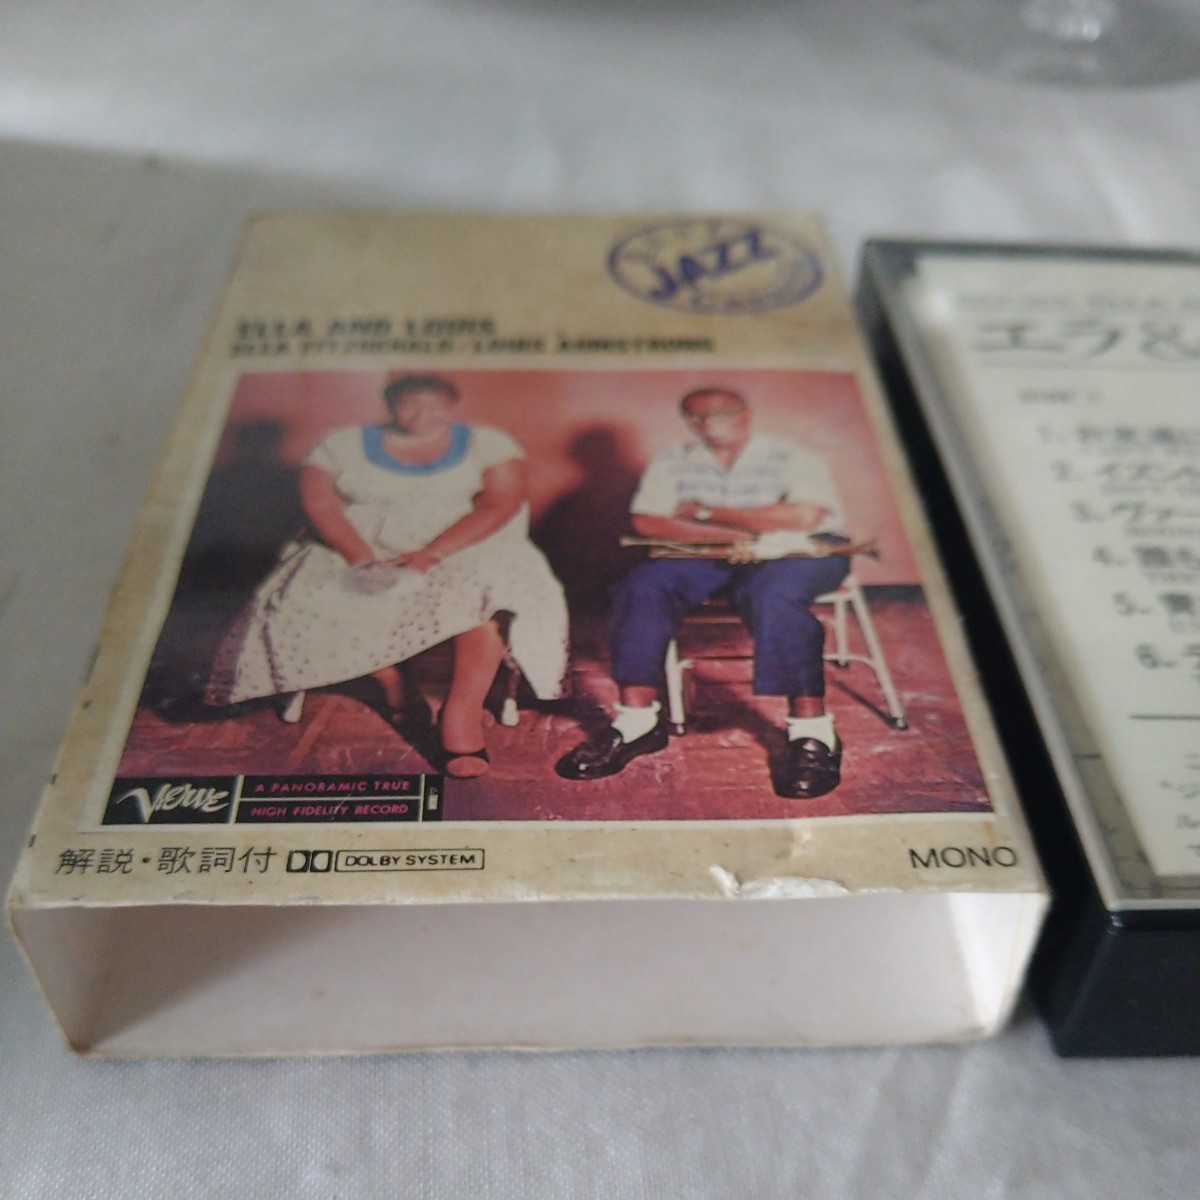 n-632*ela& Louis cassette tape Jazz Japanese record reproduction has confirmed * condition is in the image please confirm.